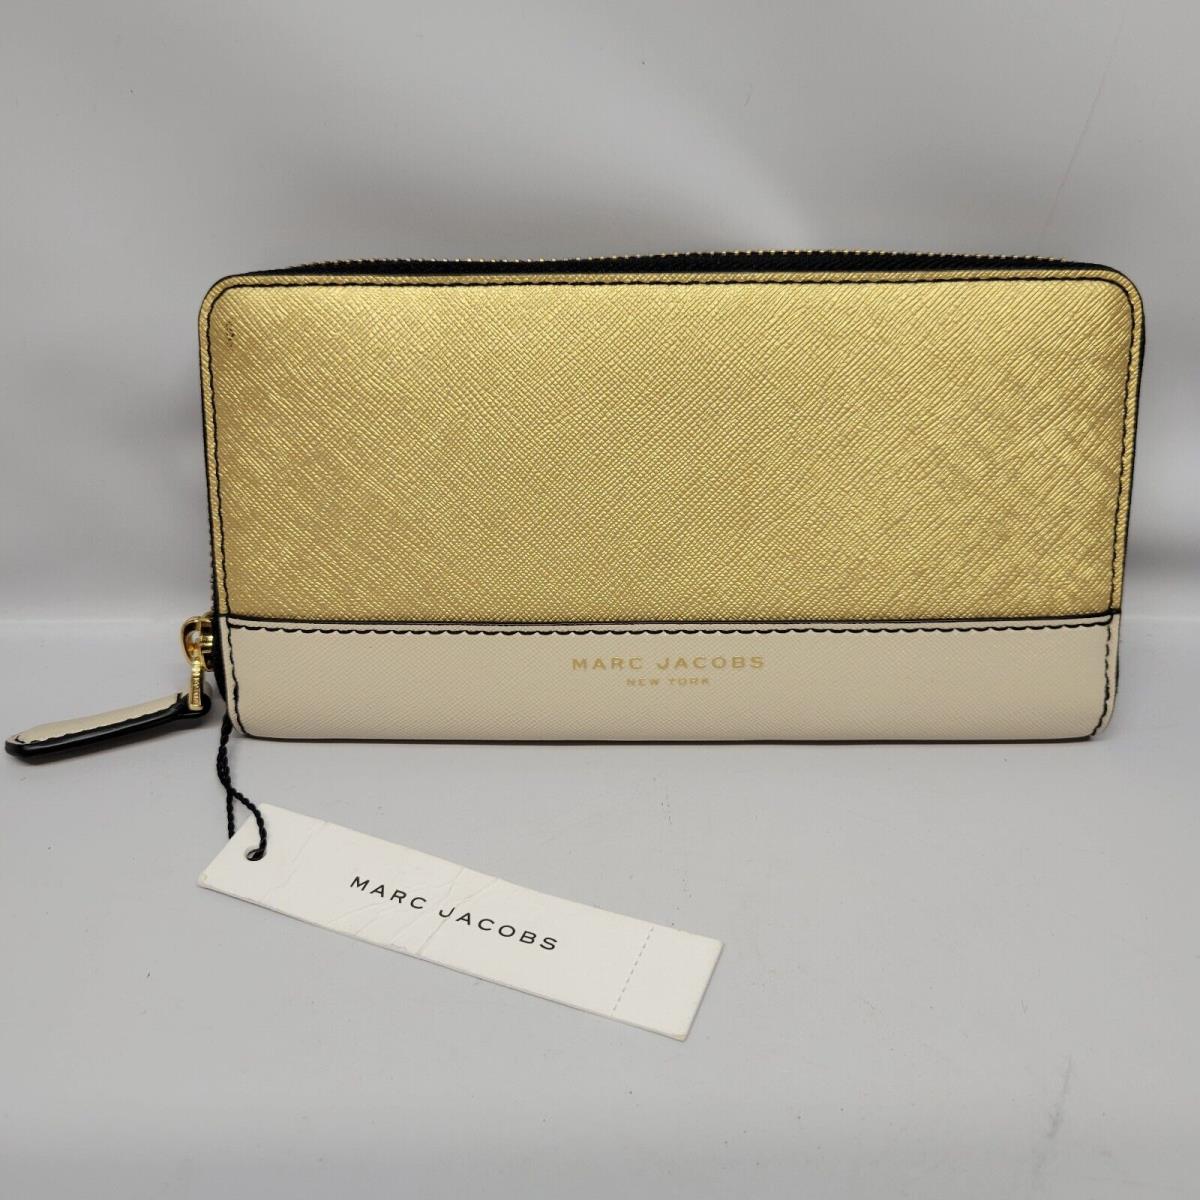 Marc Jacobs Metallic Leather Continental Wallet Gold Cream